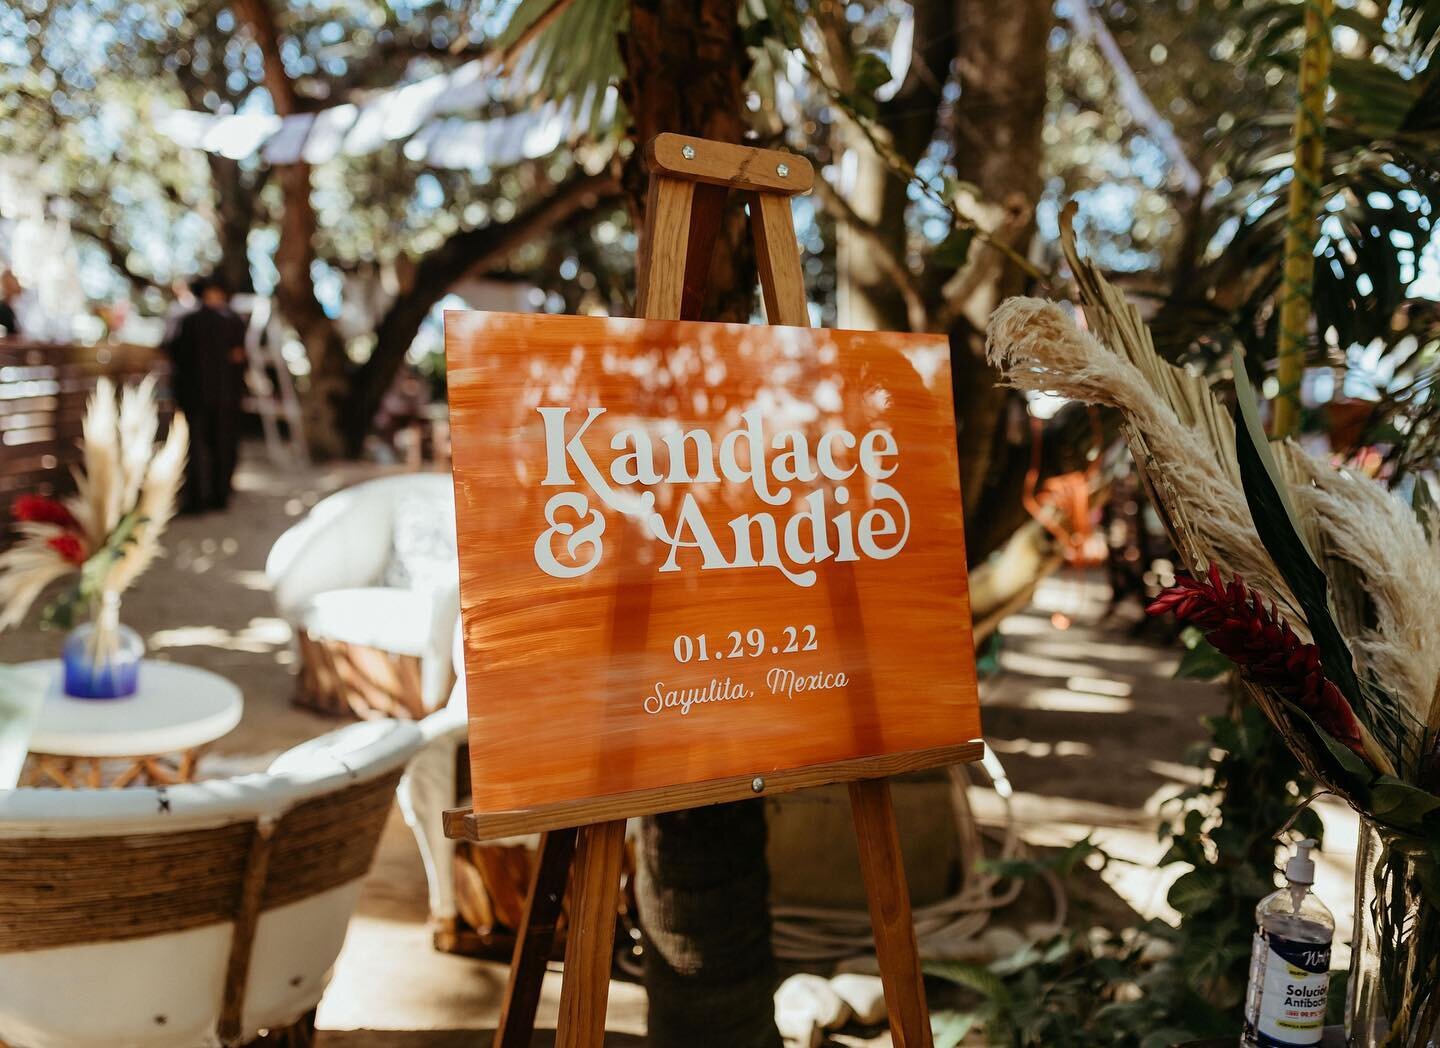 I had the most fun designing all of my own wedding signage and invitations!! Can&rsquo;t wait to show you all the final shots of how everything came together. For now, a sneak peak. 😉

More photos to come&ndash; but if anyone is interested in having